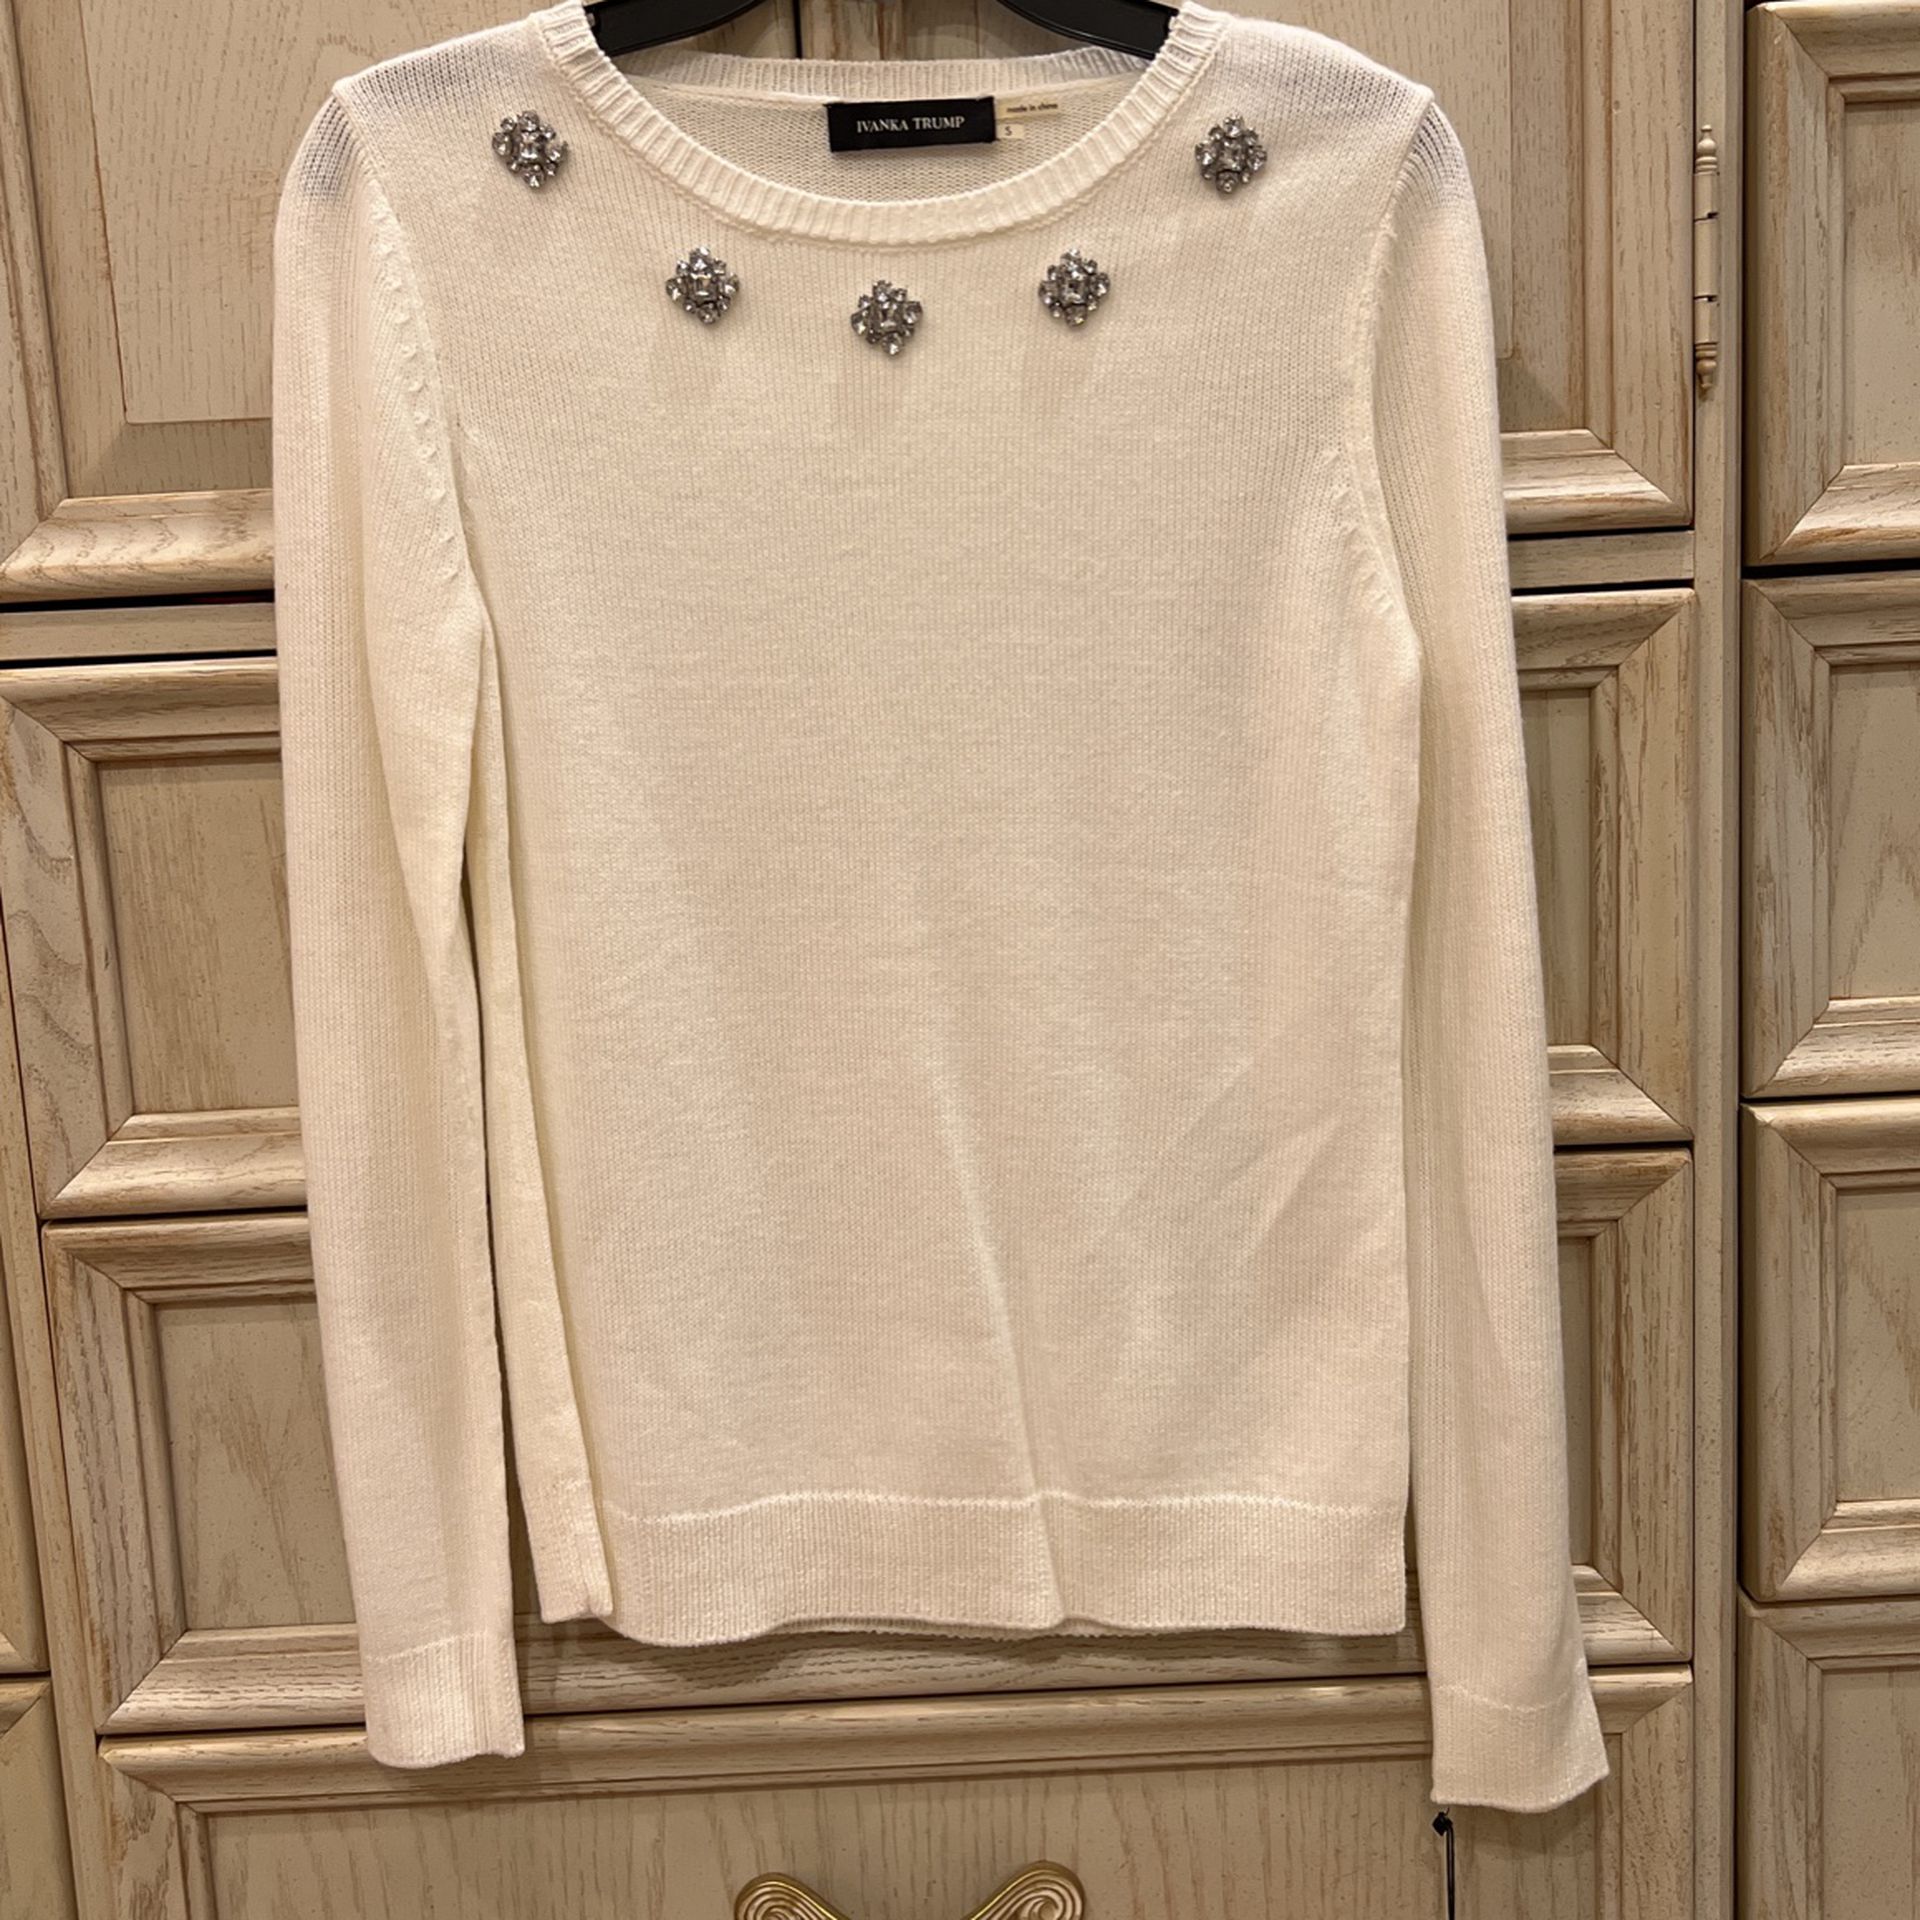 Ivanka Trump Cream Colored Sweater with Crystal Embellished Collar